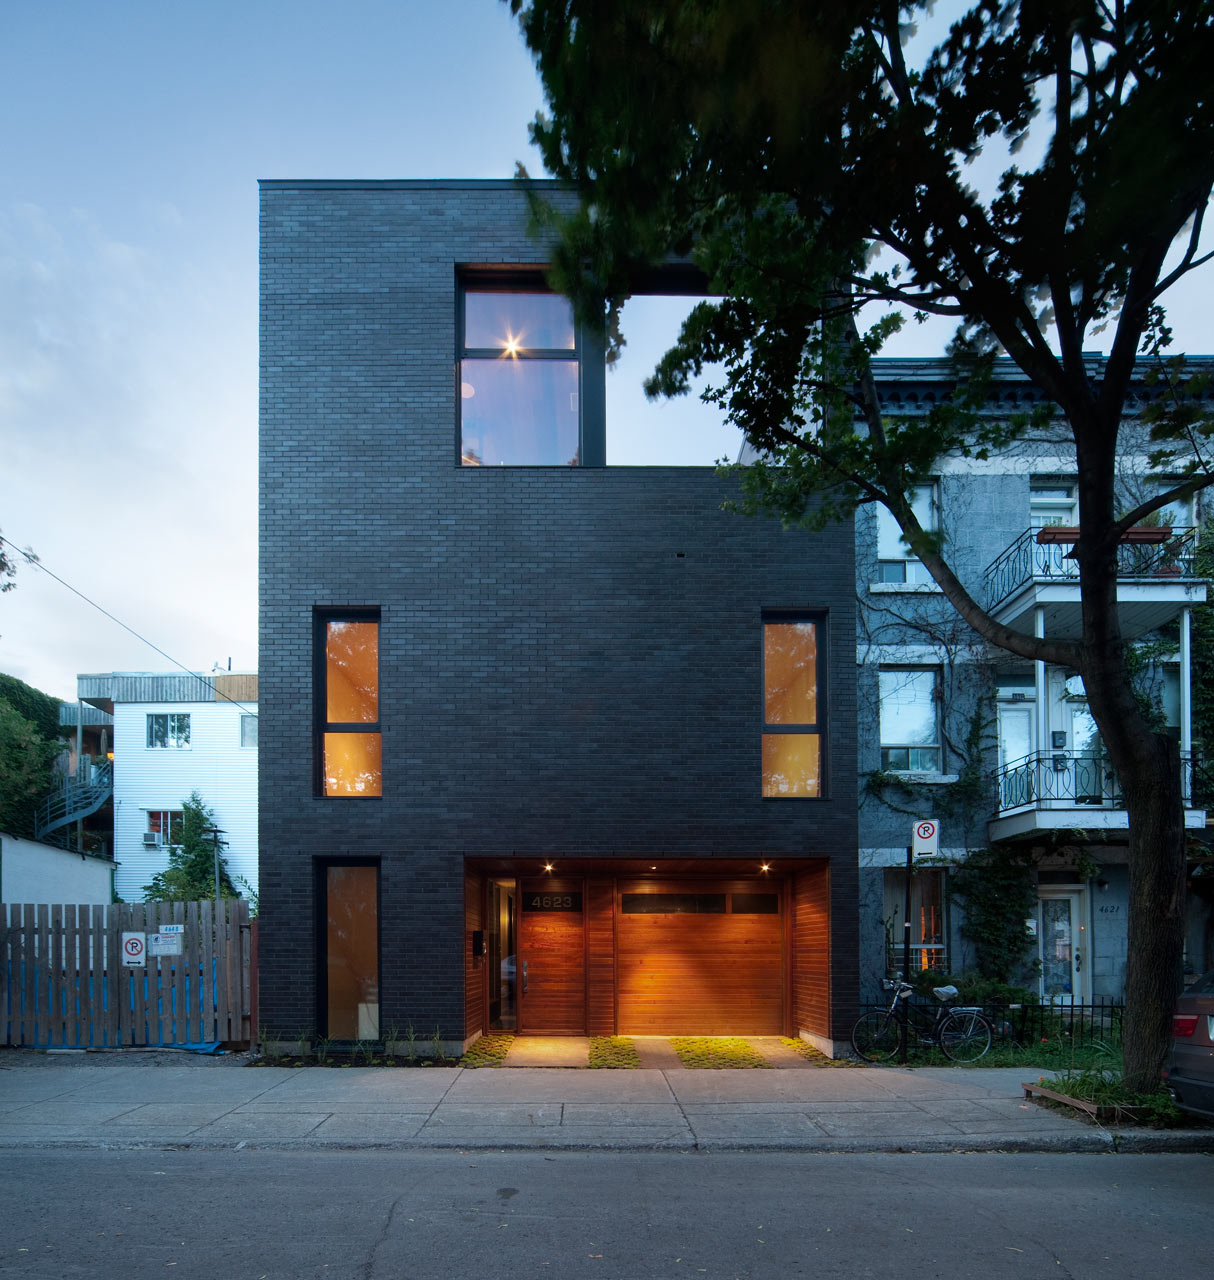 Houses that Share One Lot in Montreal